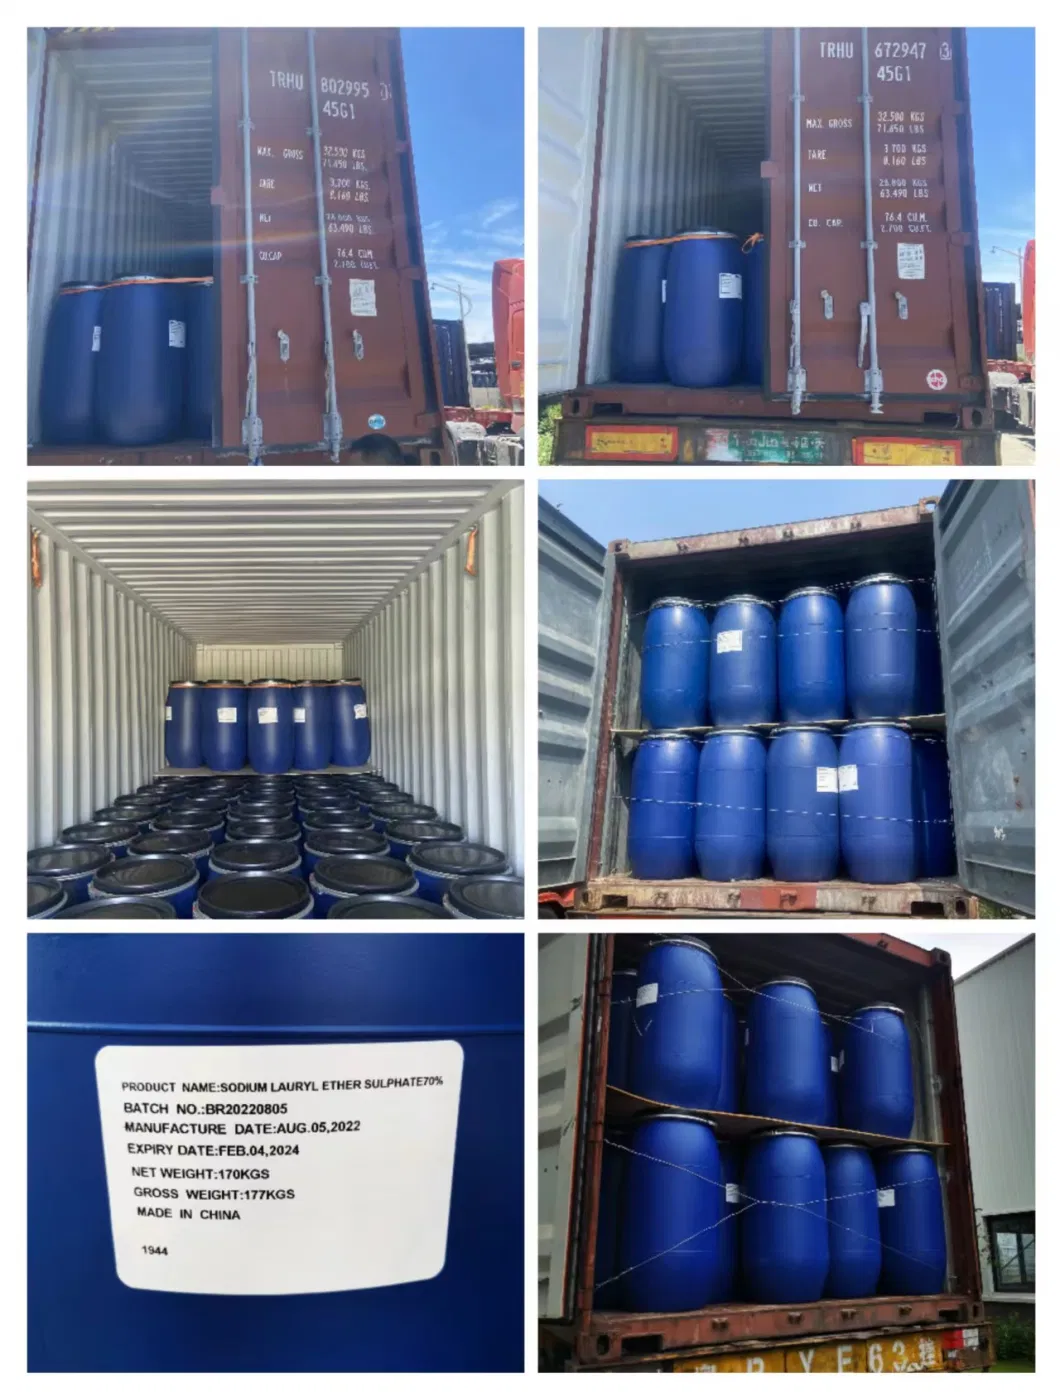 The Factory Chemicals Product Supplies Cyclohexanone CAS 108-94-1 Industrial Grade Cyclohexanone 99.9% Inventory Price Is Low